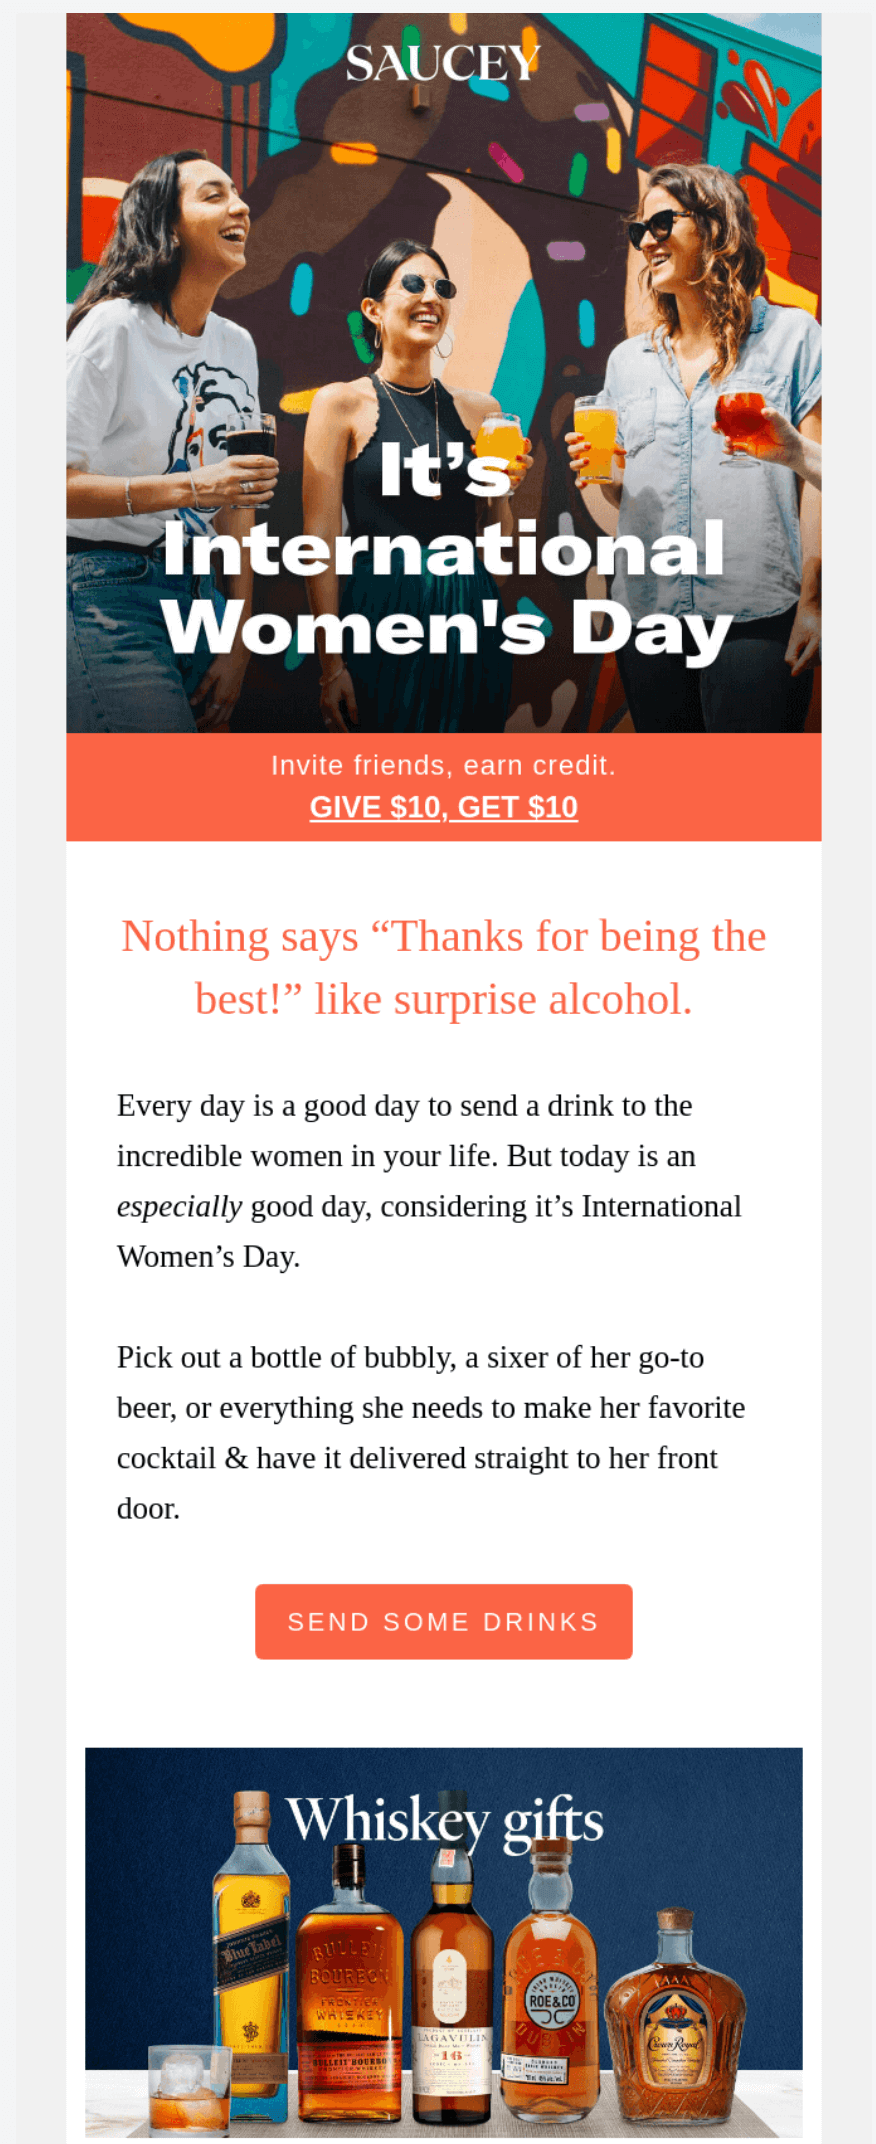 International Women's Day email example from Saucy